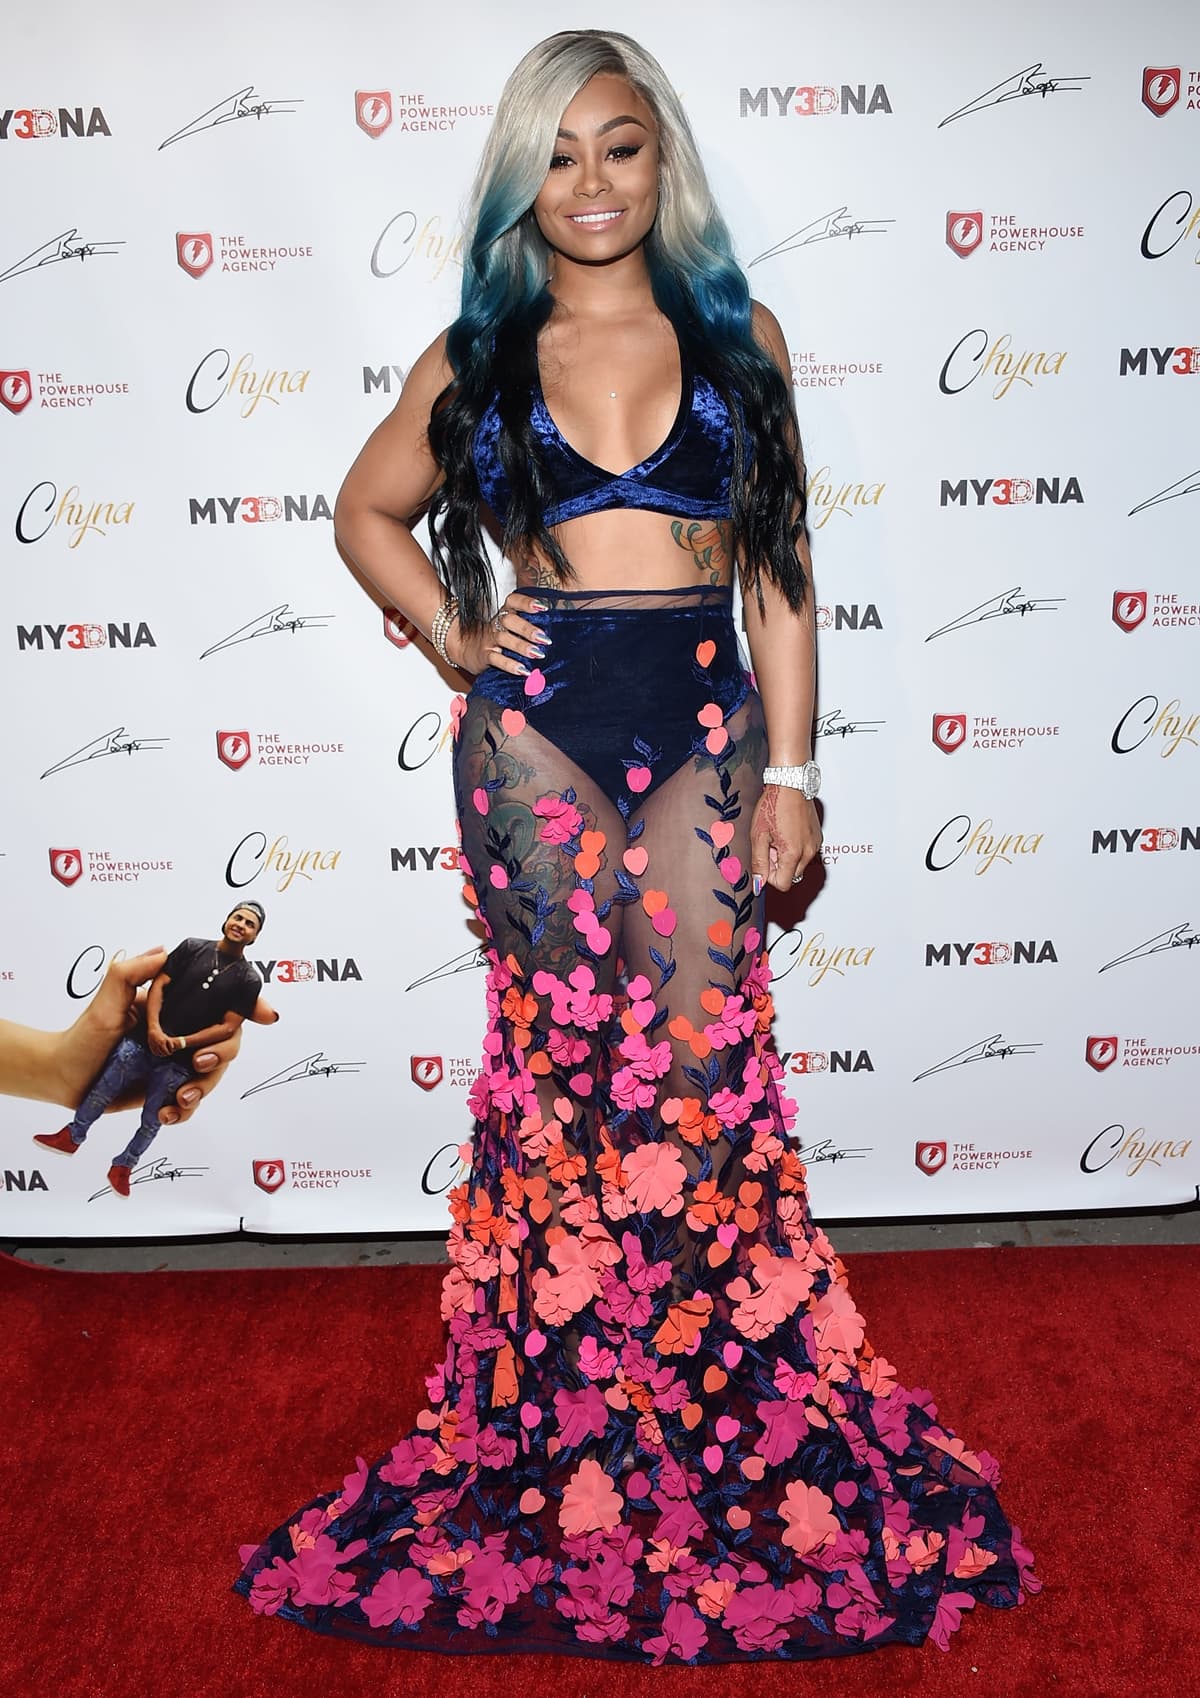 Blac Chyna in a c custom crushed velvet and 3D Floral dress by Shane Justin at the Blac Chyna Figurine Doll Launch